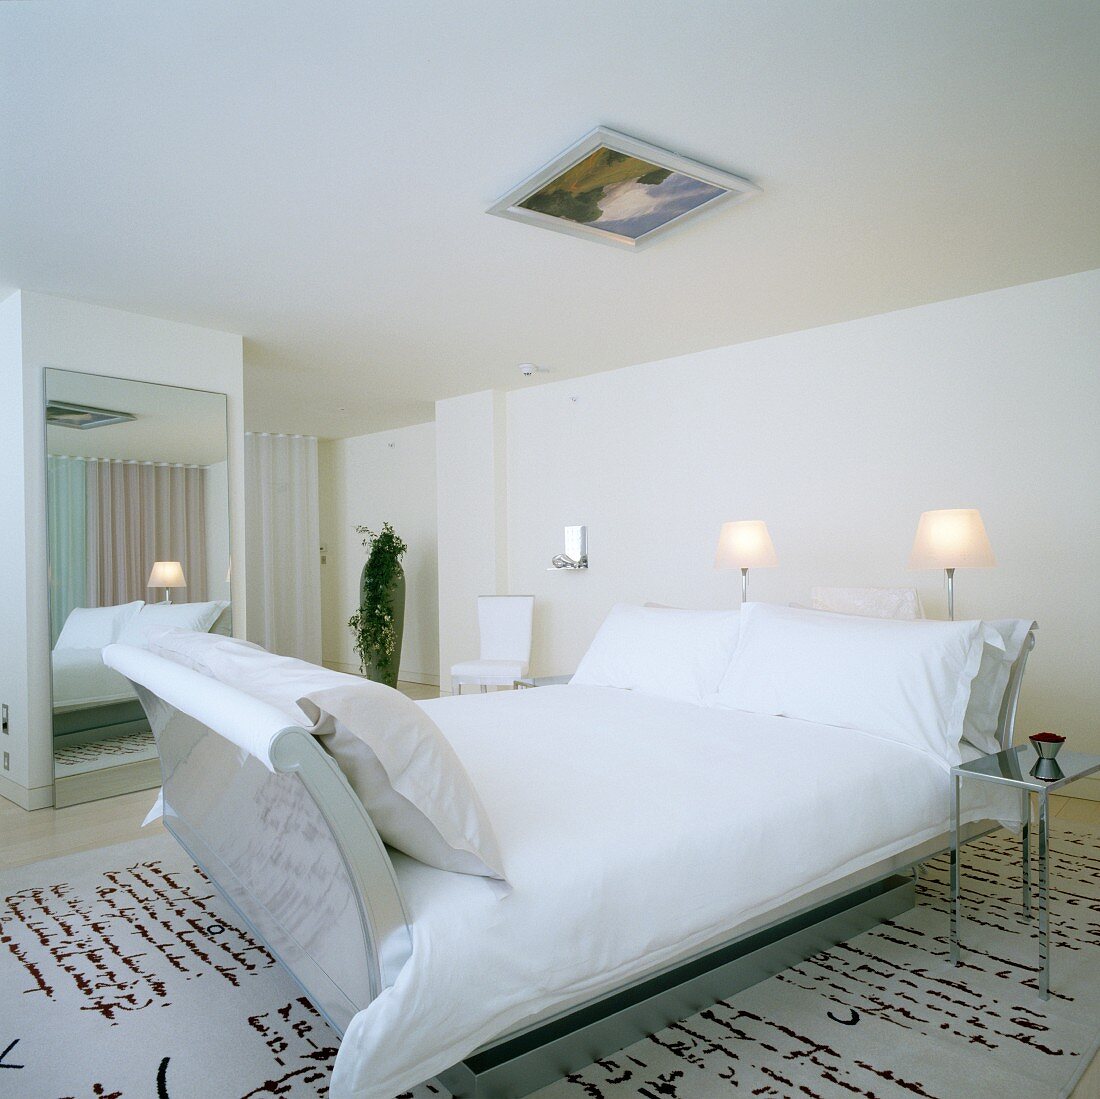 Room in elegant London hotel; rug with pattern of hand-writing, designer sleigh bed and framed picture on ceiling